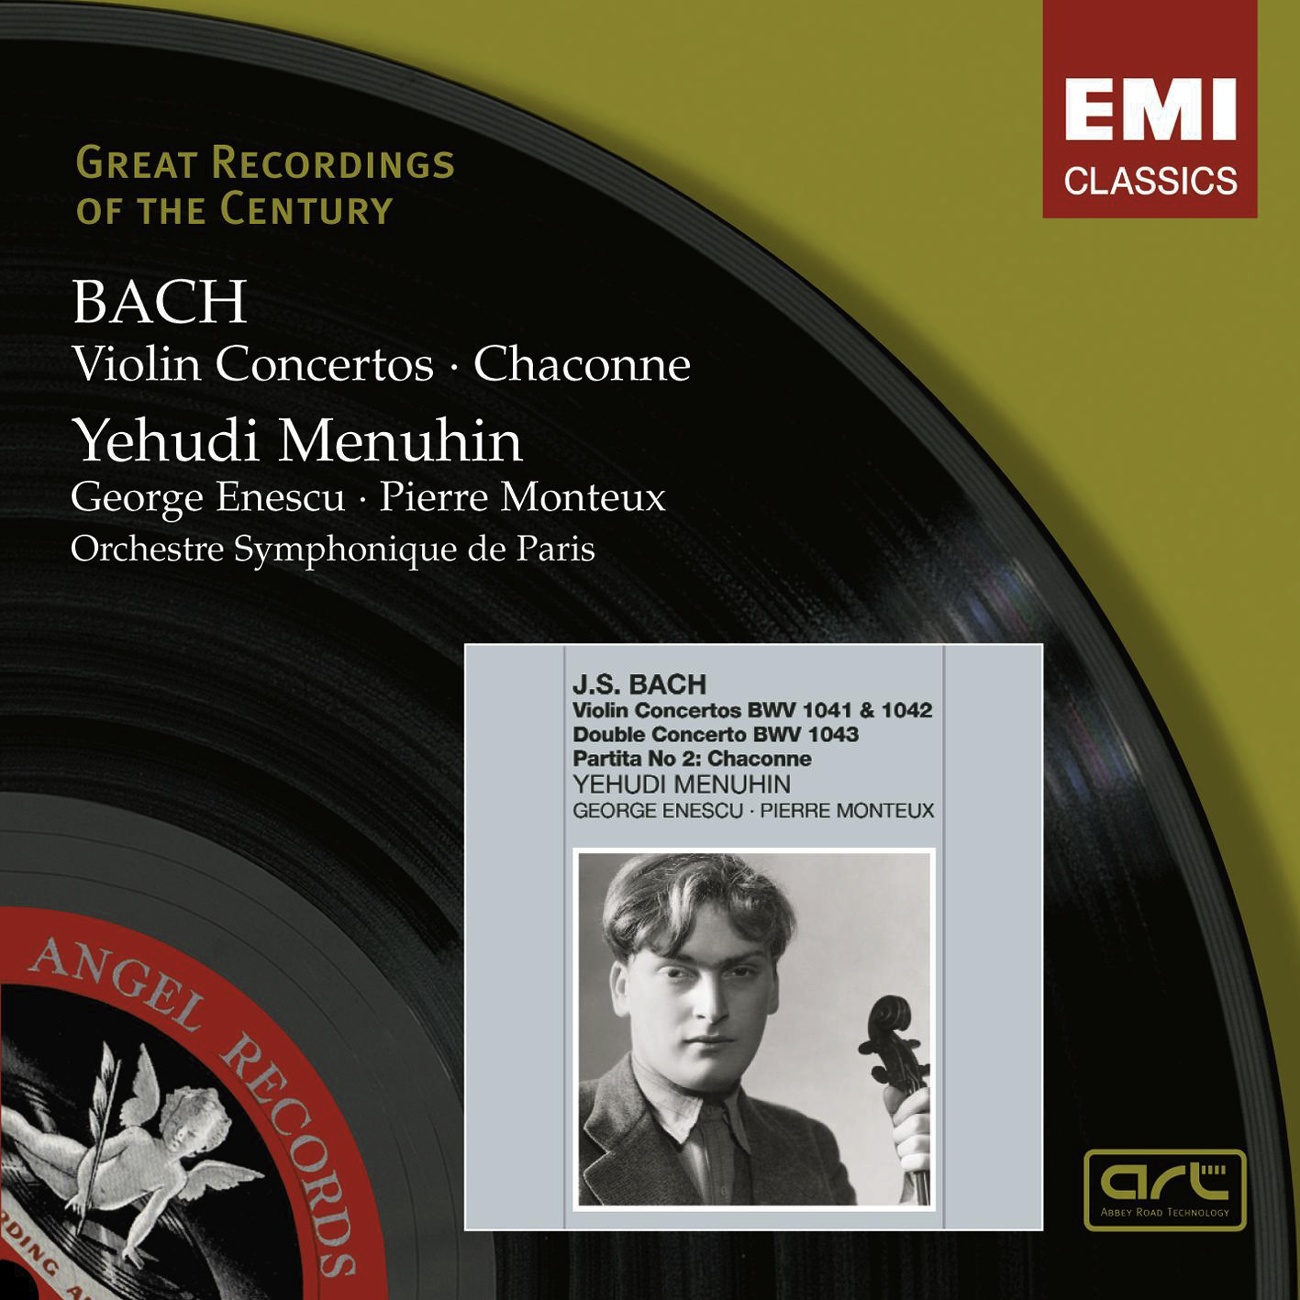 Partita No.2 in D Minor, BWV 1004 (2007 Remastered Version): Chaconne